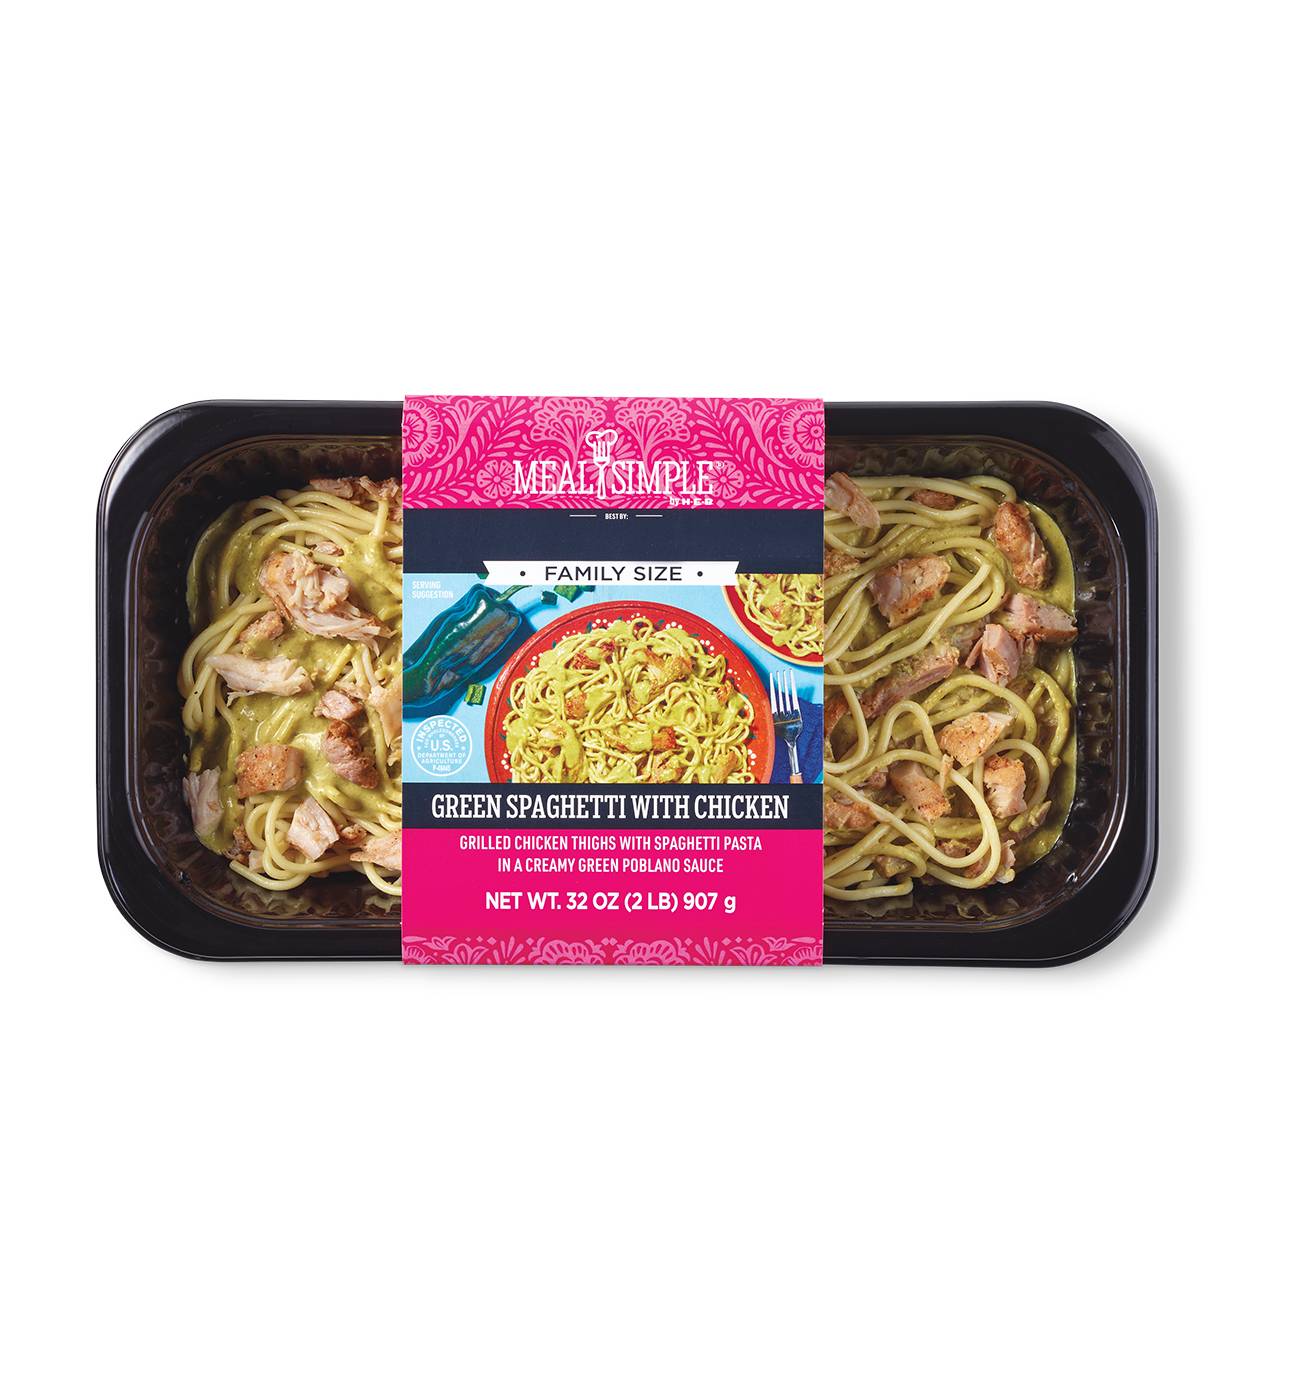 Meal Simple by H-E-B Green Spaghetti with Chicken - Family Size; image 2 of 5